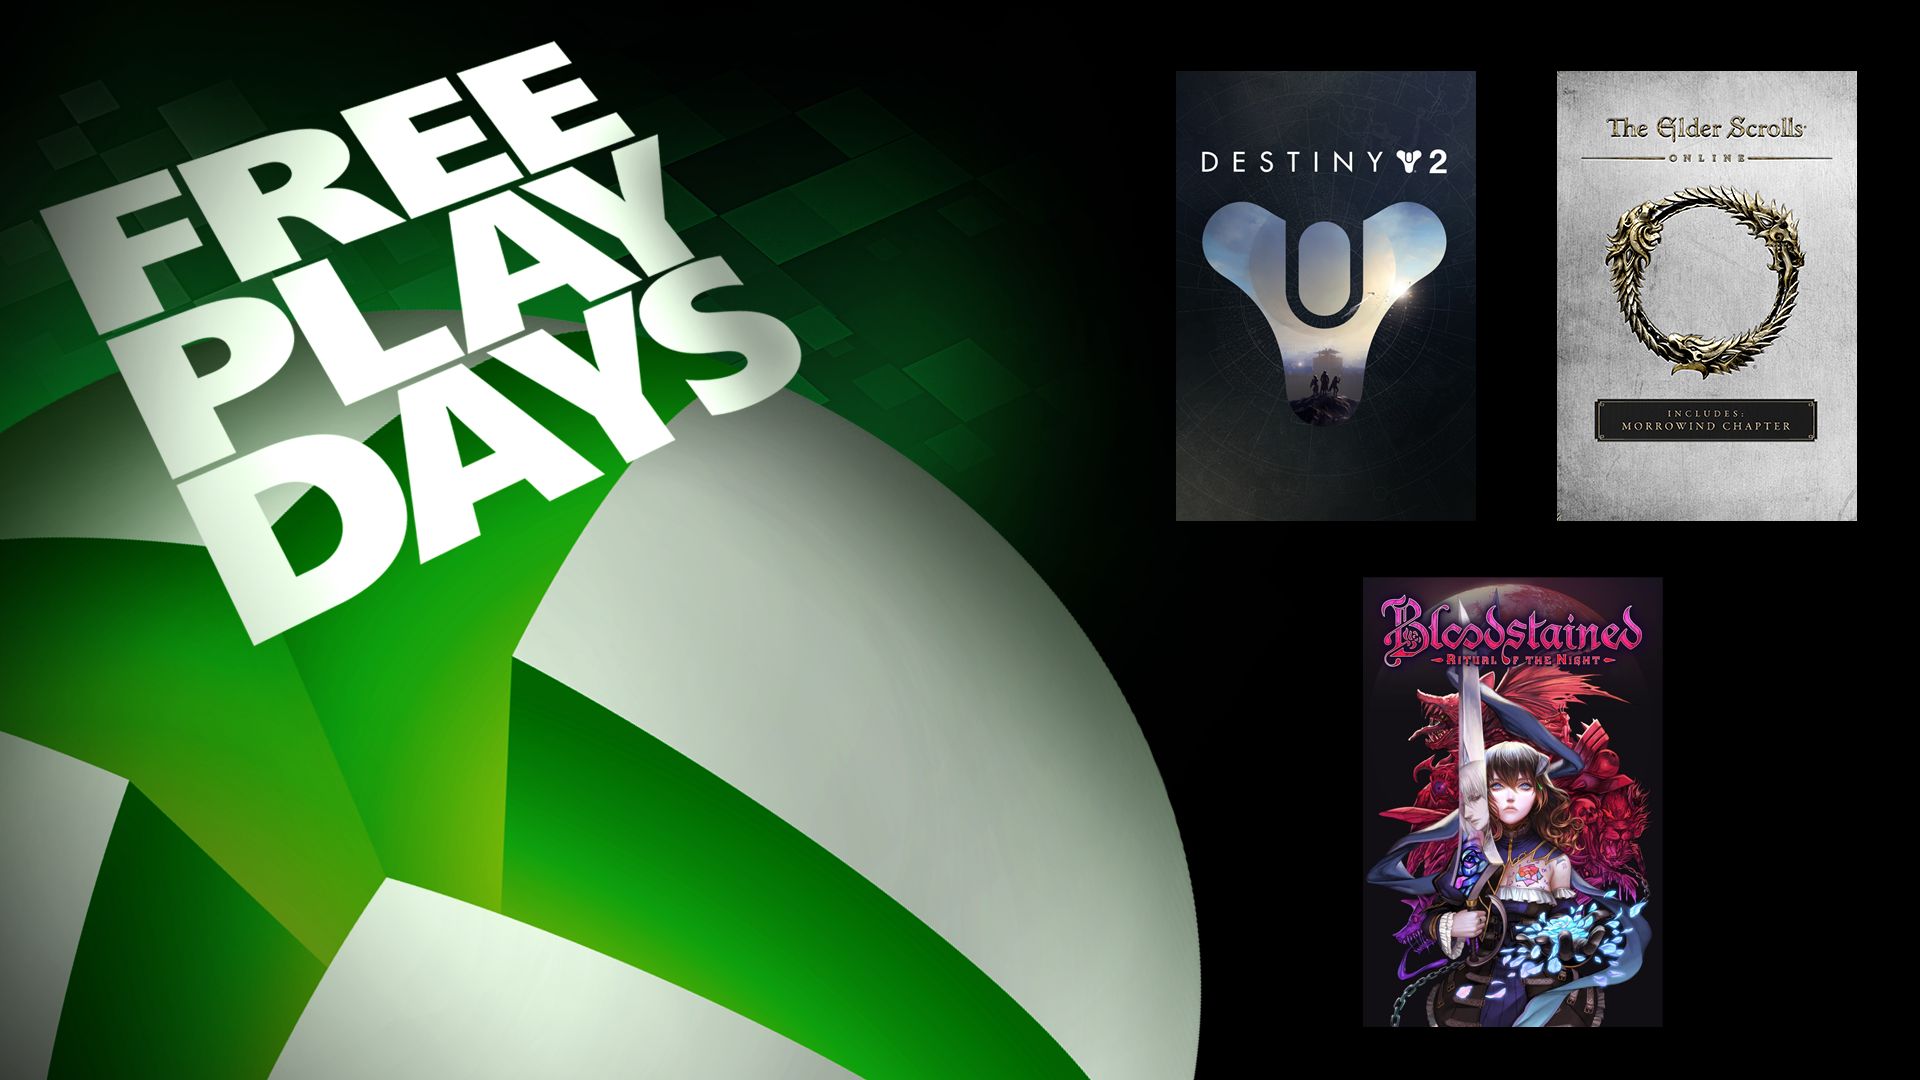 Xbox Free Play Days: Destiny 2, Bloodstained Ritual of the Night, The Elder Scrolls Online